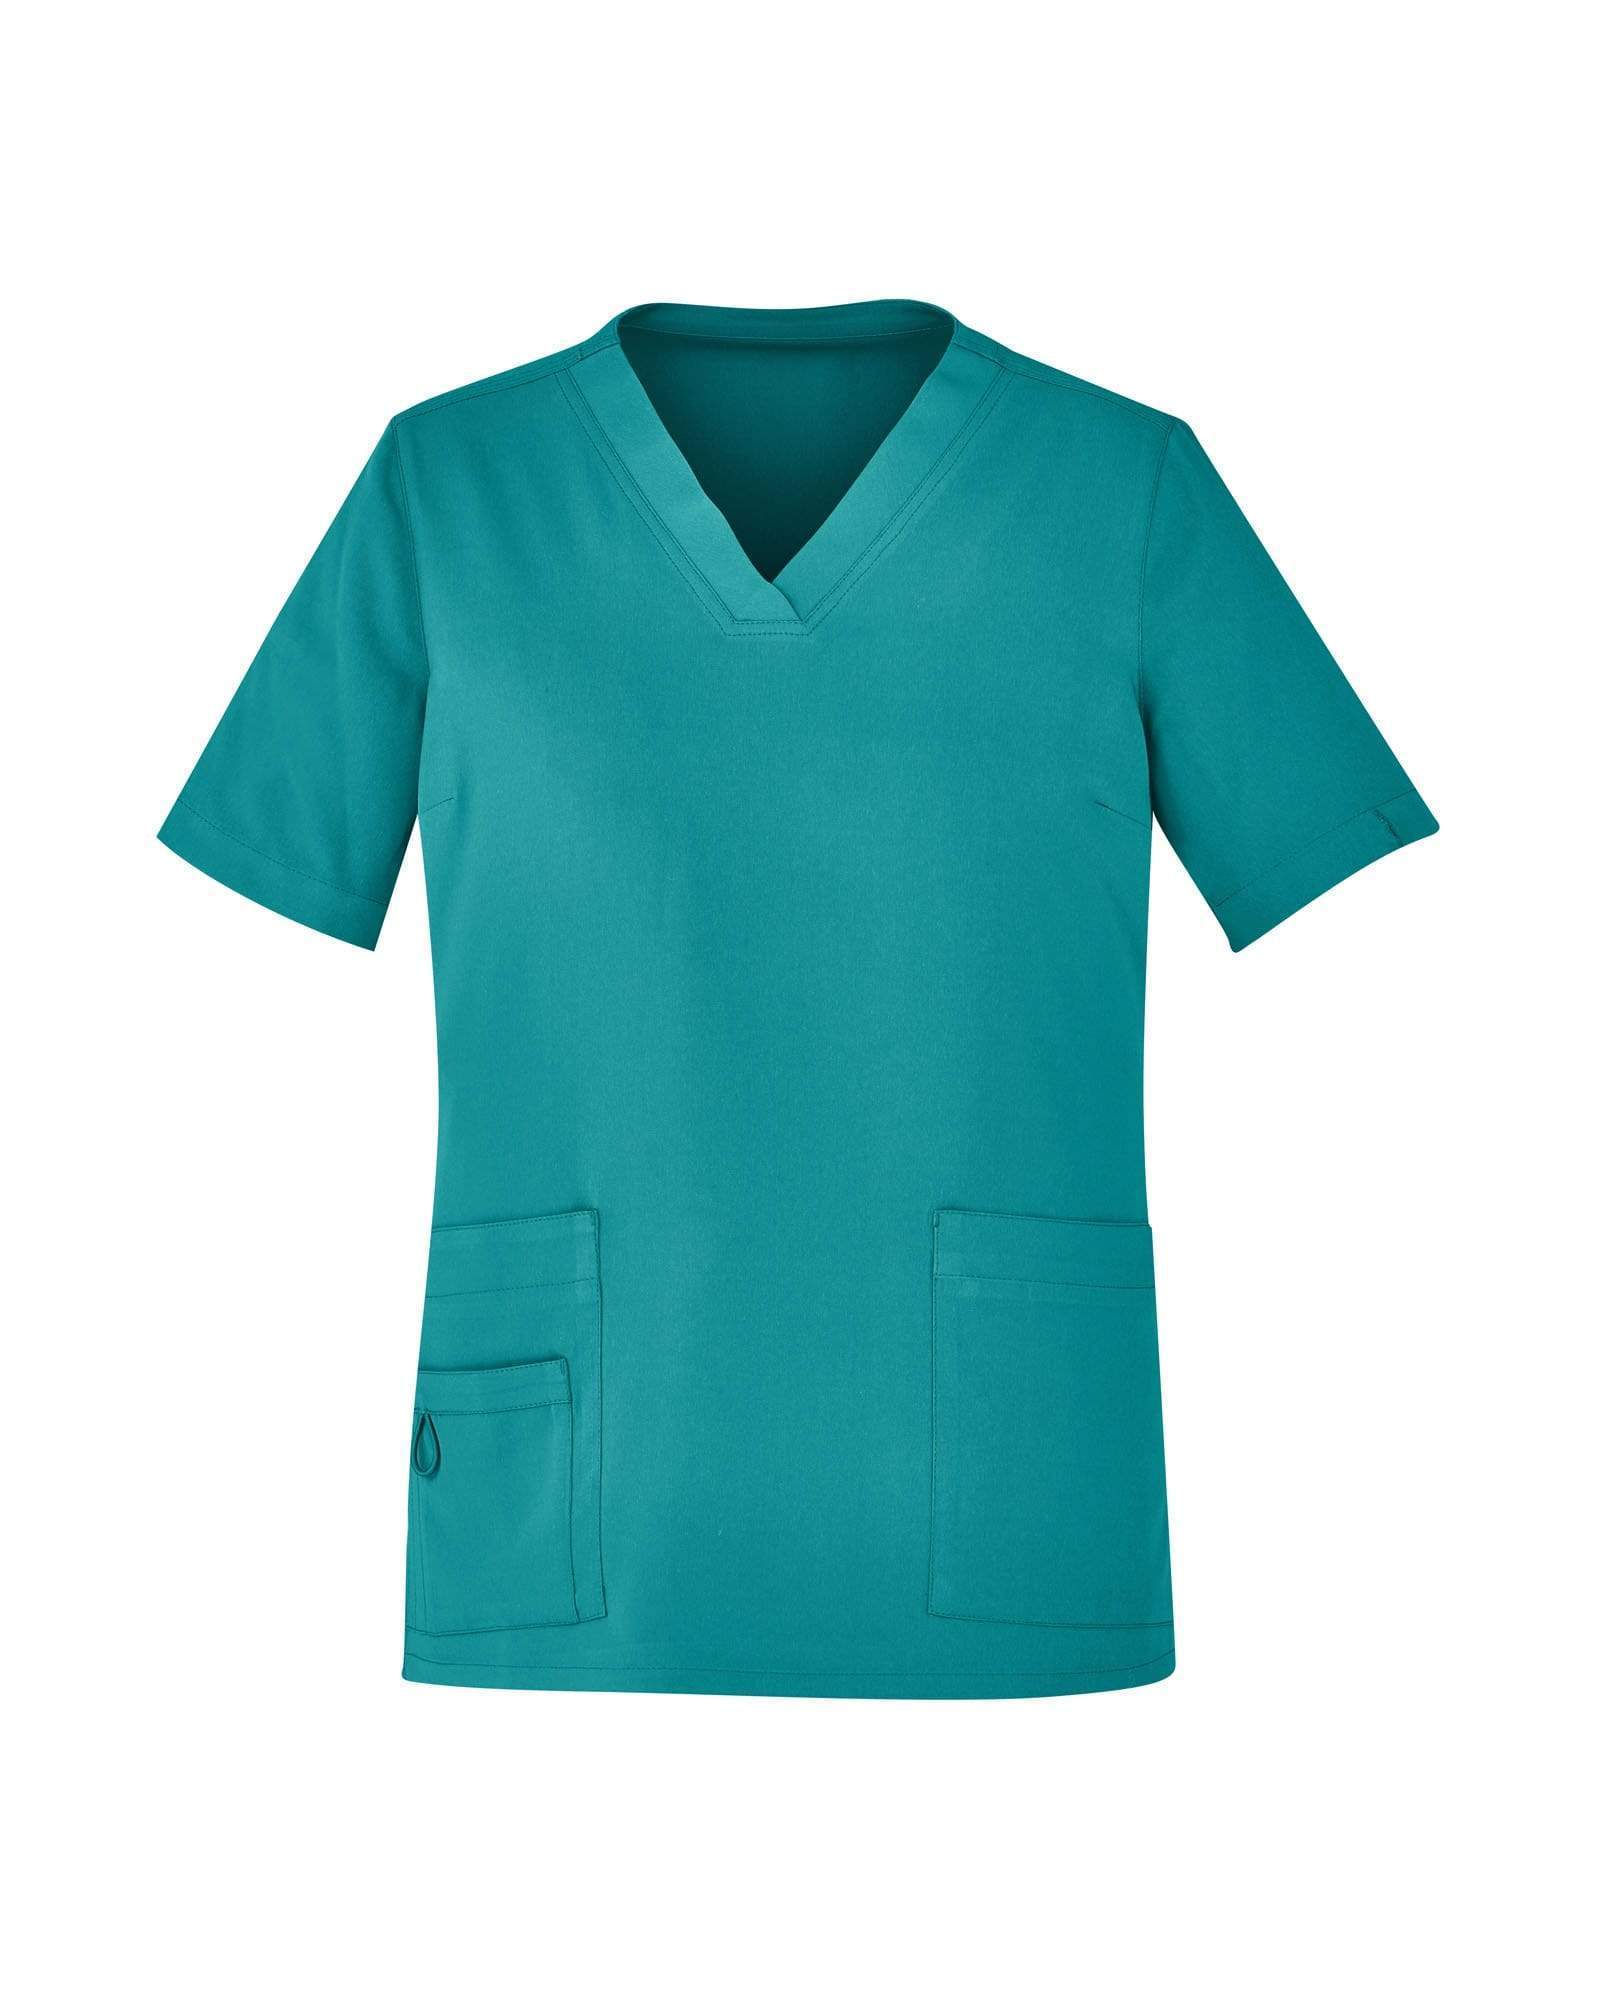 Biz Care Womens Avery Easy Fit V-Neck Medical Scrub Top CST941LS Health & Beauty Biz Care Teal S 